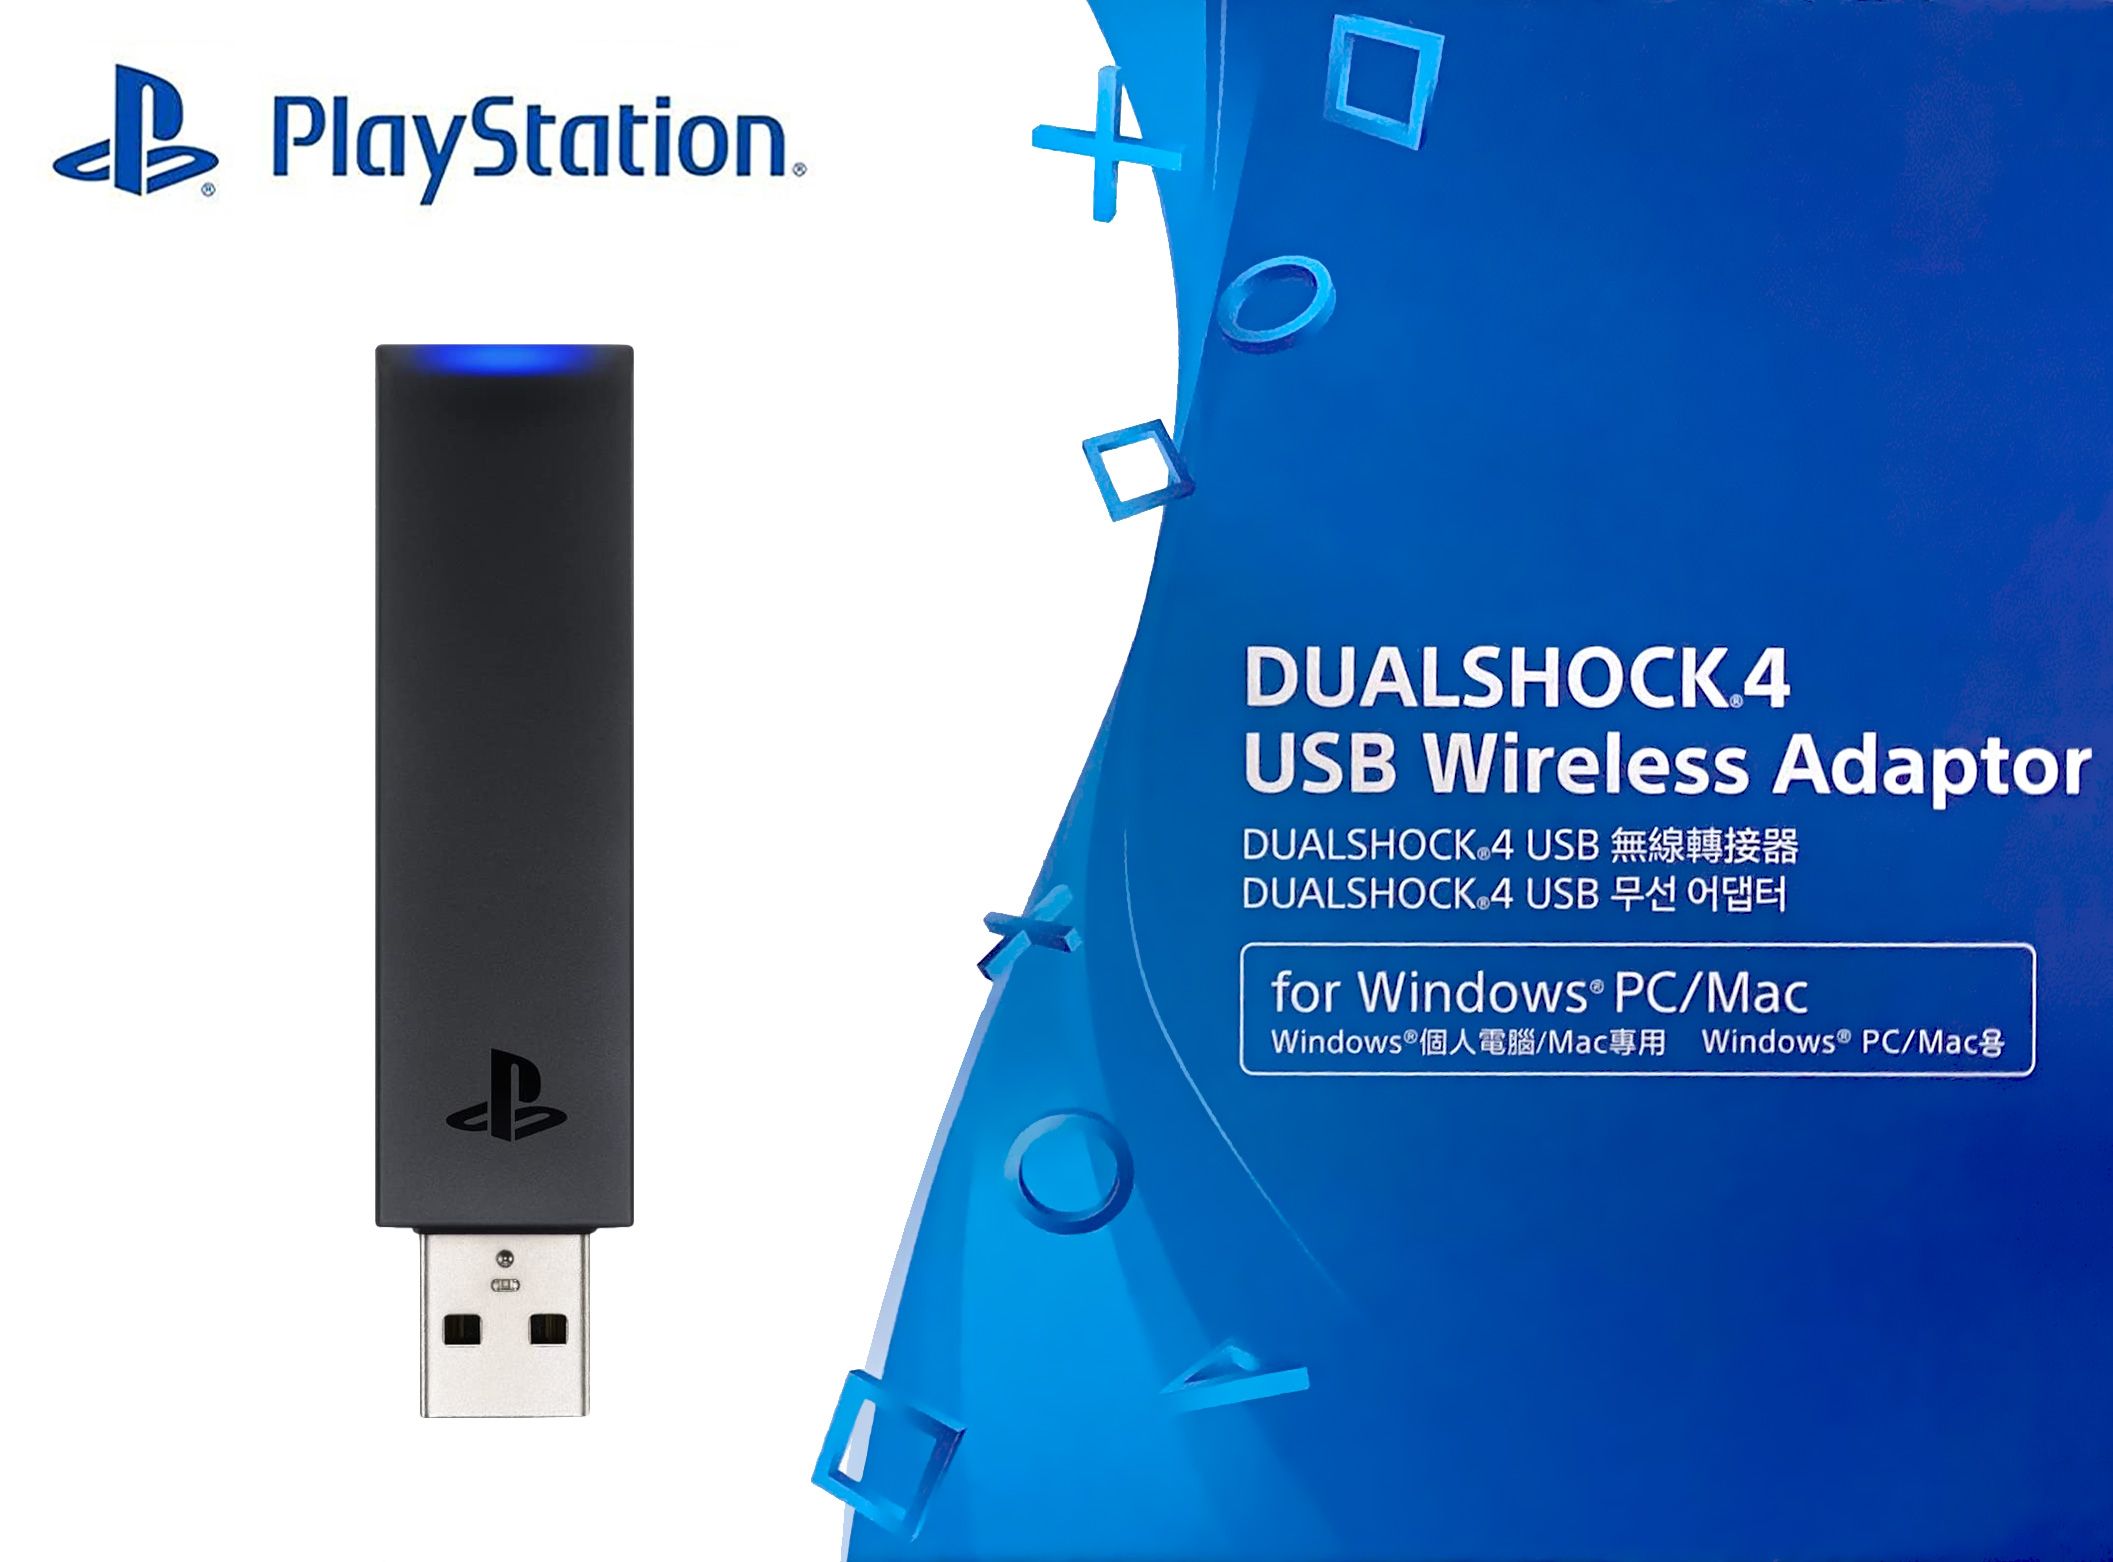 forståelse Blinke kjole Accessory Bundles & Add Ons - Sony PlayStation DualShock 4 USB Wireless  Adapter (PC)(New) - Sony (SIE / SCE) 400G was sold for R1,480.00 on 18 Apr  at 01:27 by Pwned Games in Cape Town (ID:578544502)